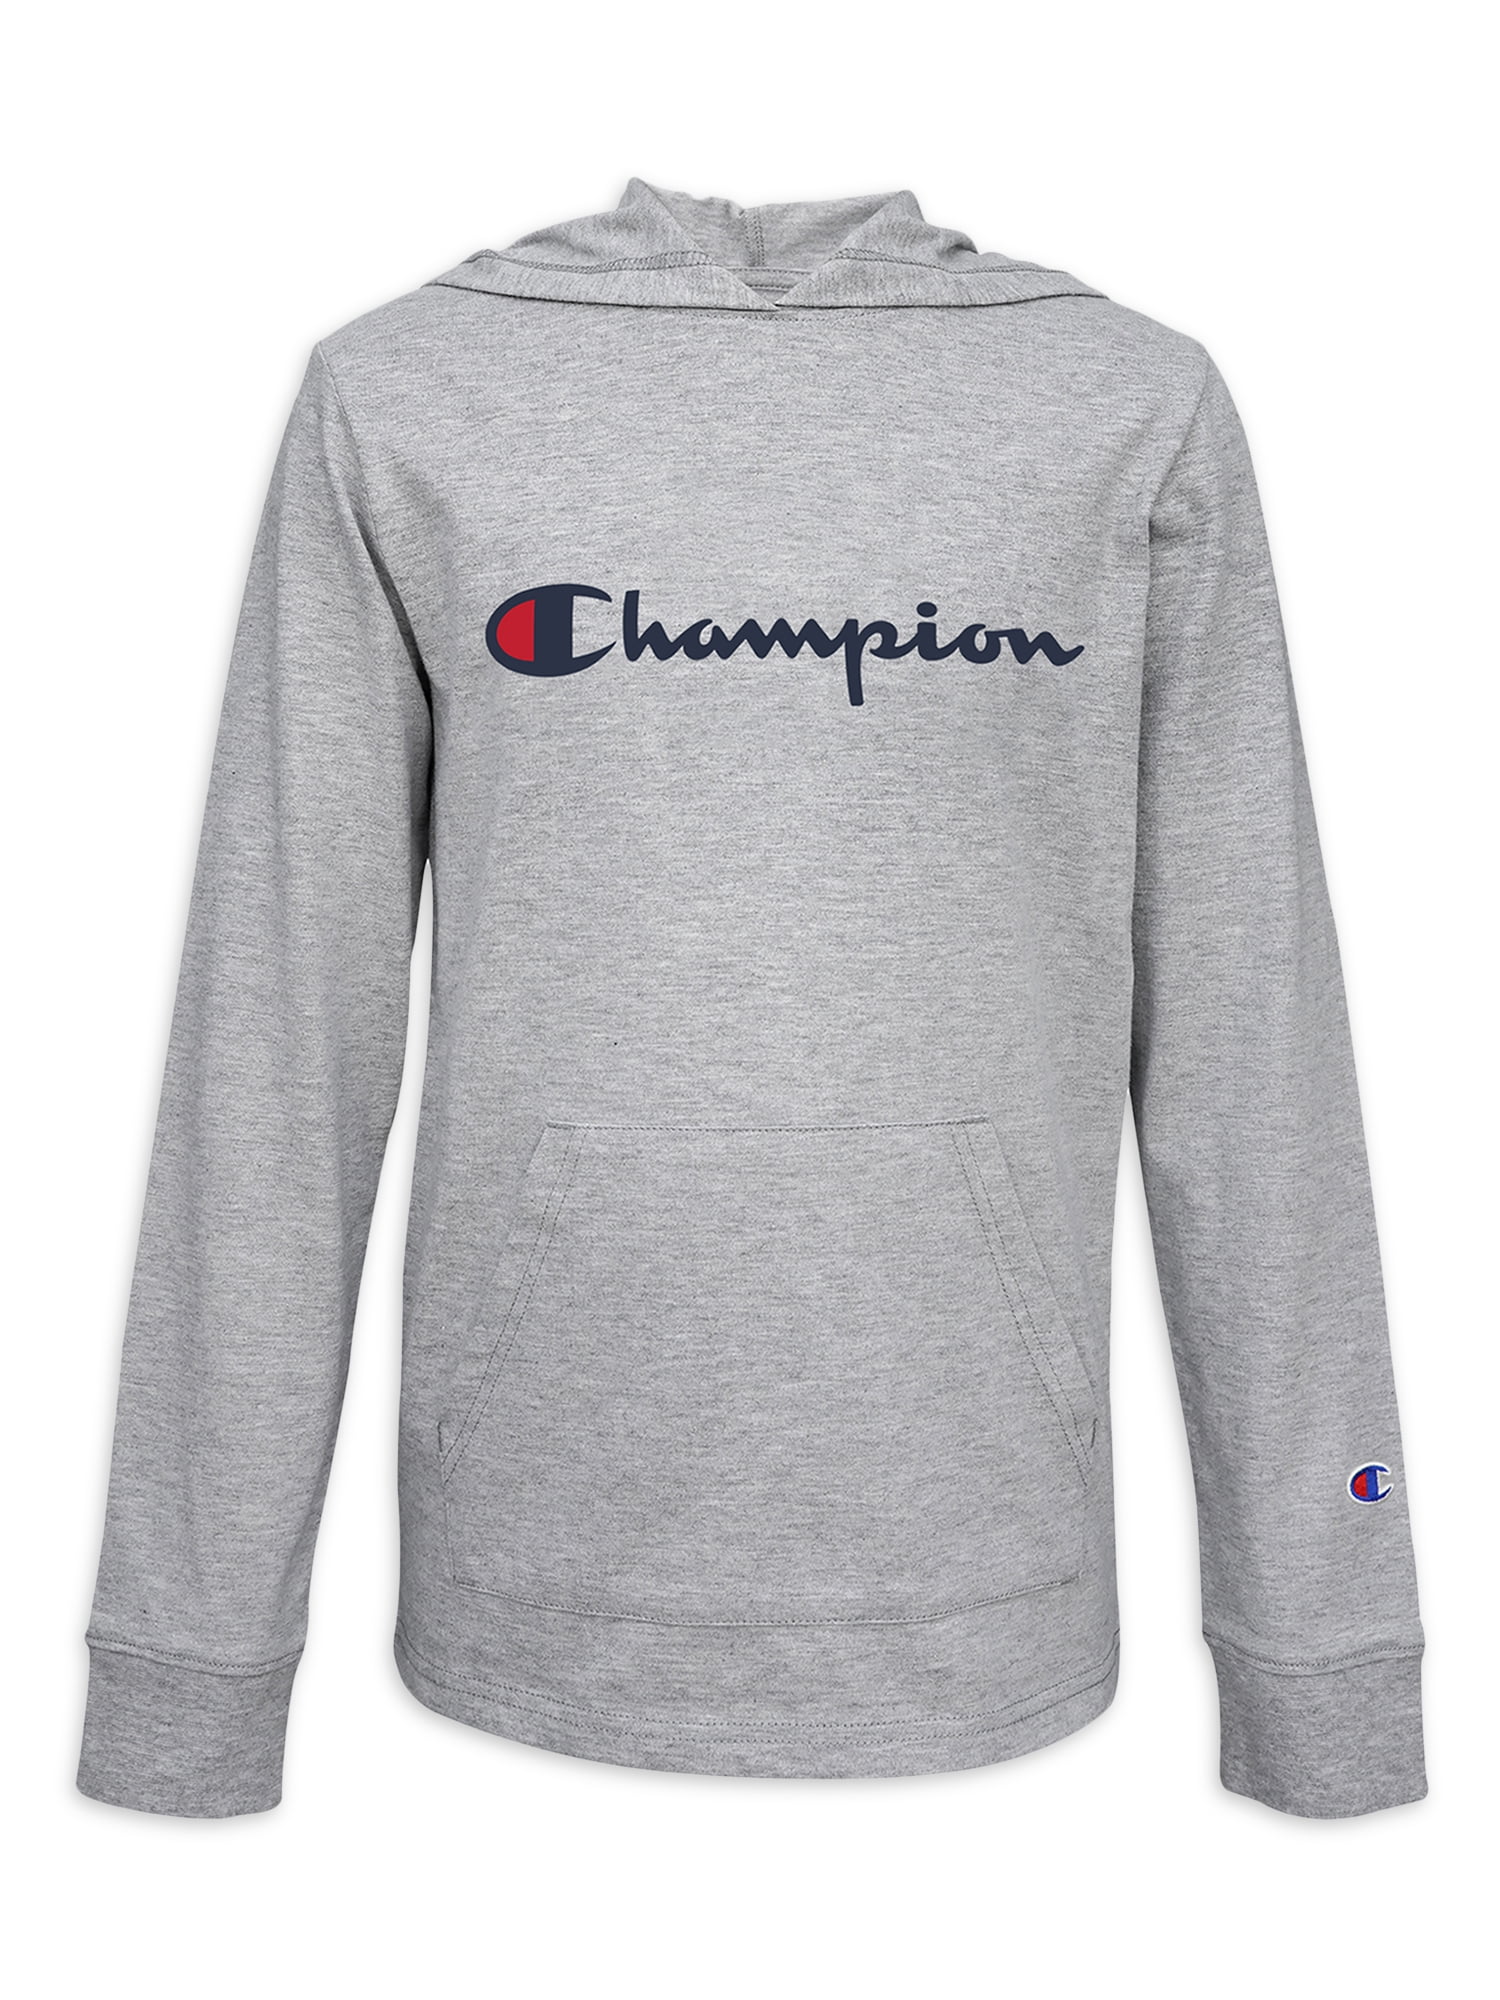 5617-8 Details about   Champion System Child USA Tech T Shirt Size Youth Small YS 